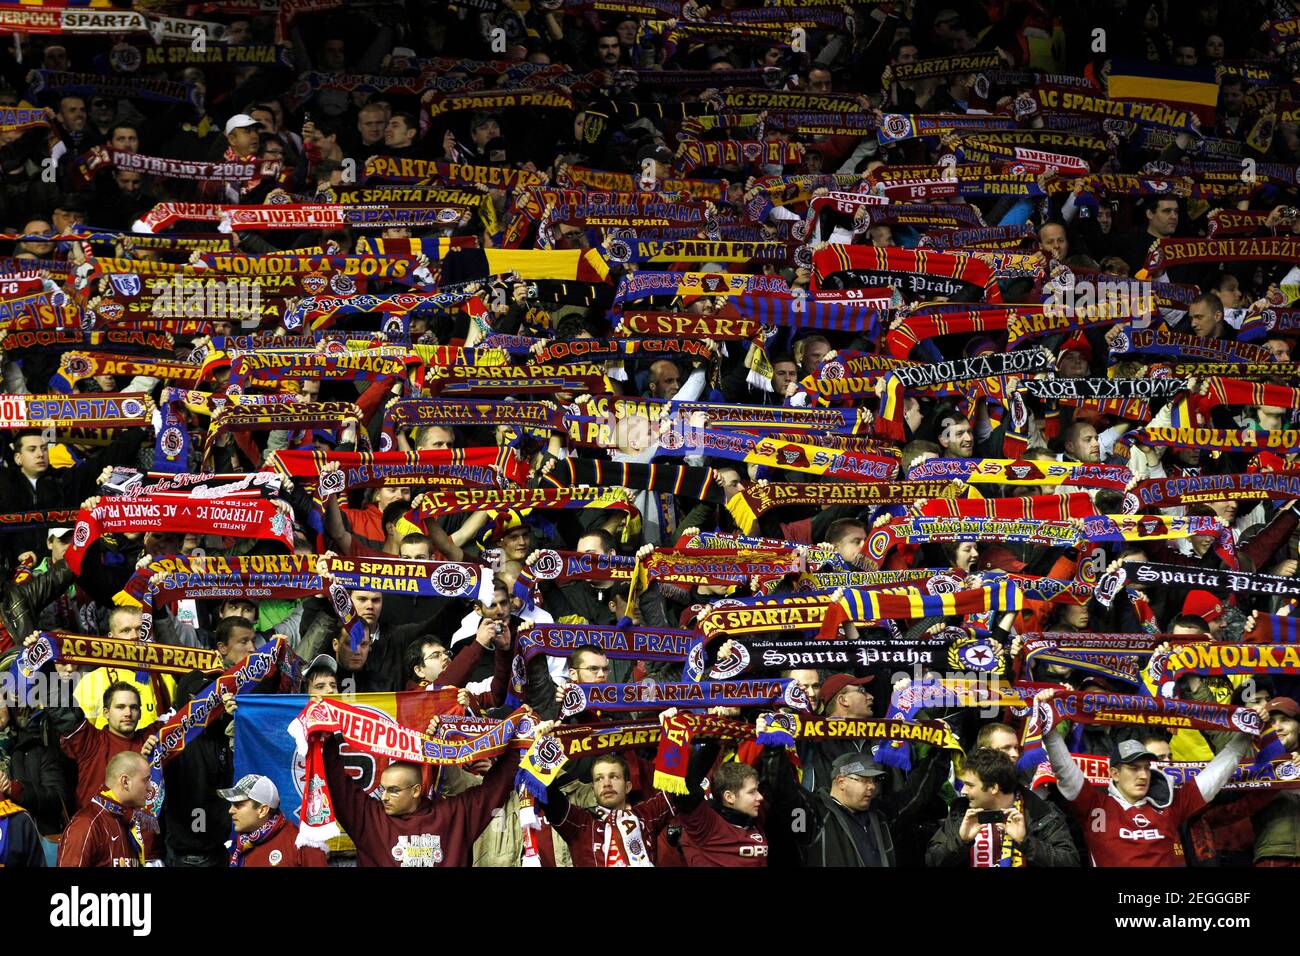 Sparta Prague Fans High Resolution Stock Photography and Images - Alamy